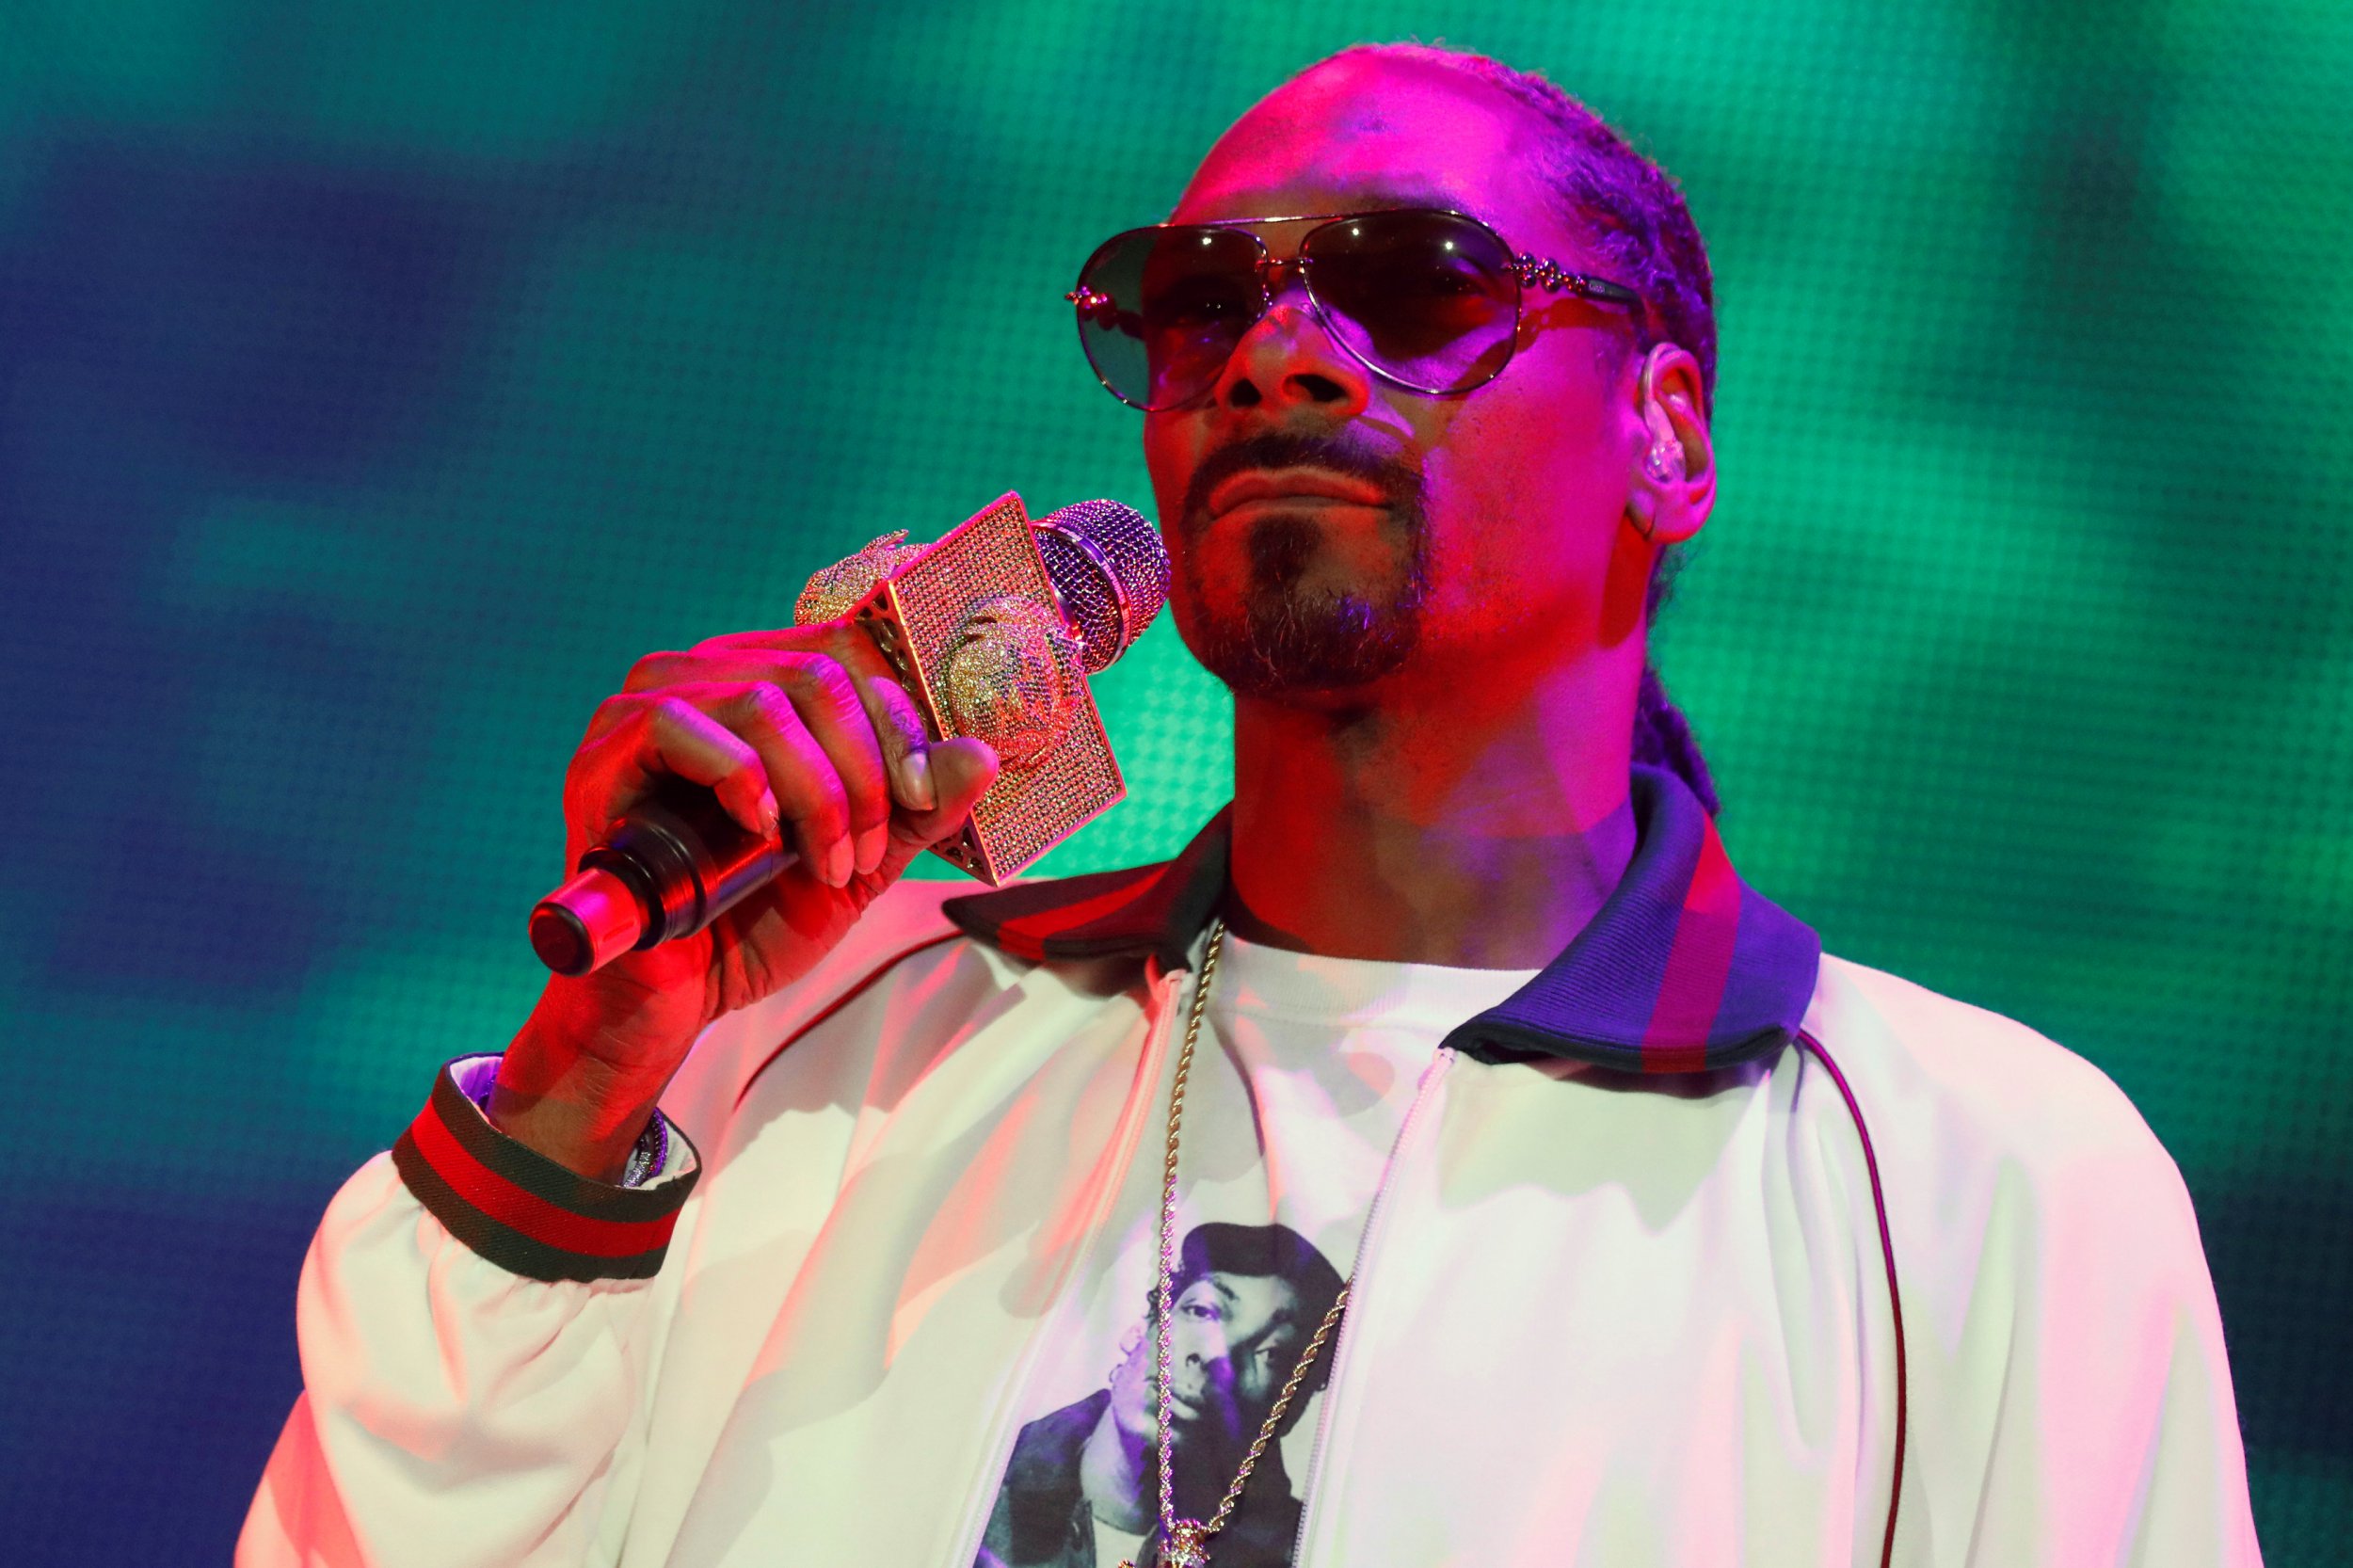 Snoop Dogg's New Video Features Mock Assassination of a 'Clown' Donald Trump